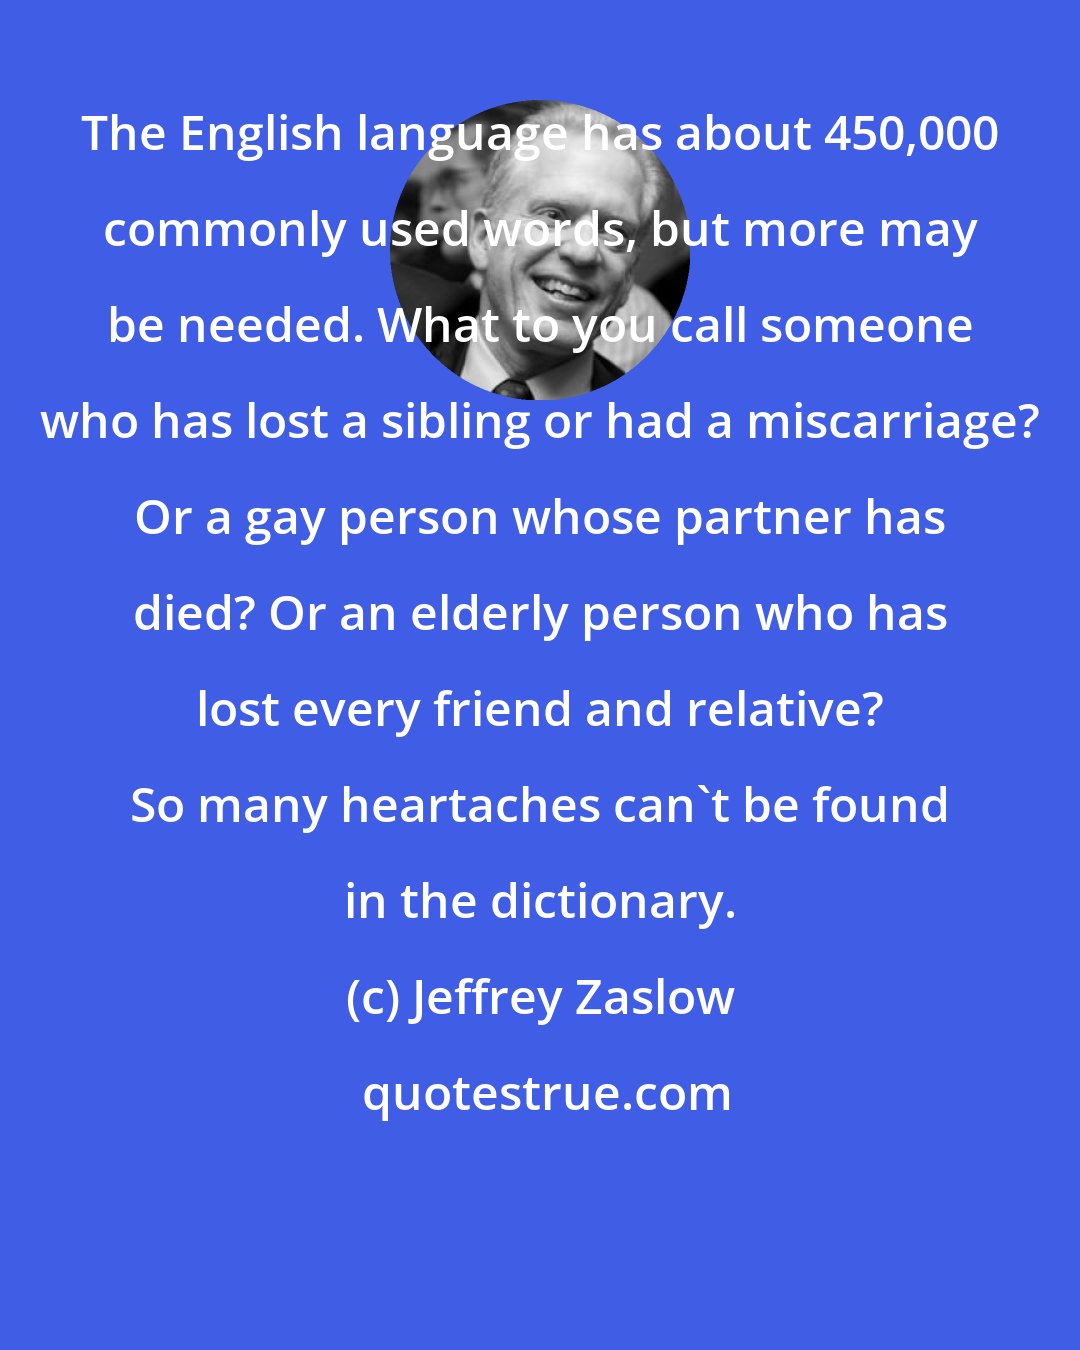 Jeffrey Zaslow: The English language has about 450,000 commonly used words, but more may be needed. What to you call someone who has lost a sibling or had a miscarriage? Or a gay person whose partner has died? Or an elderly person who has lost every friend and relative? So many heartaches can't be found in the dictionary.